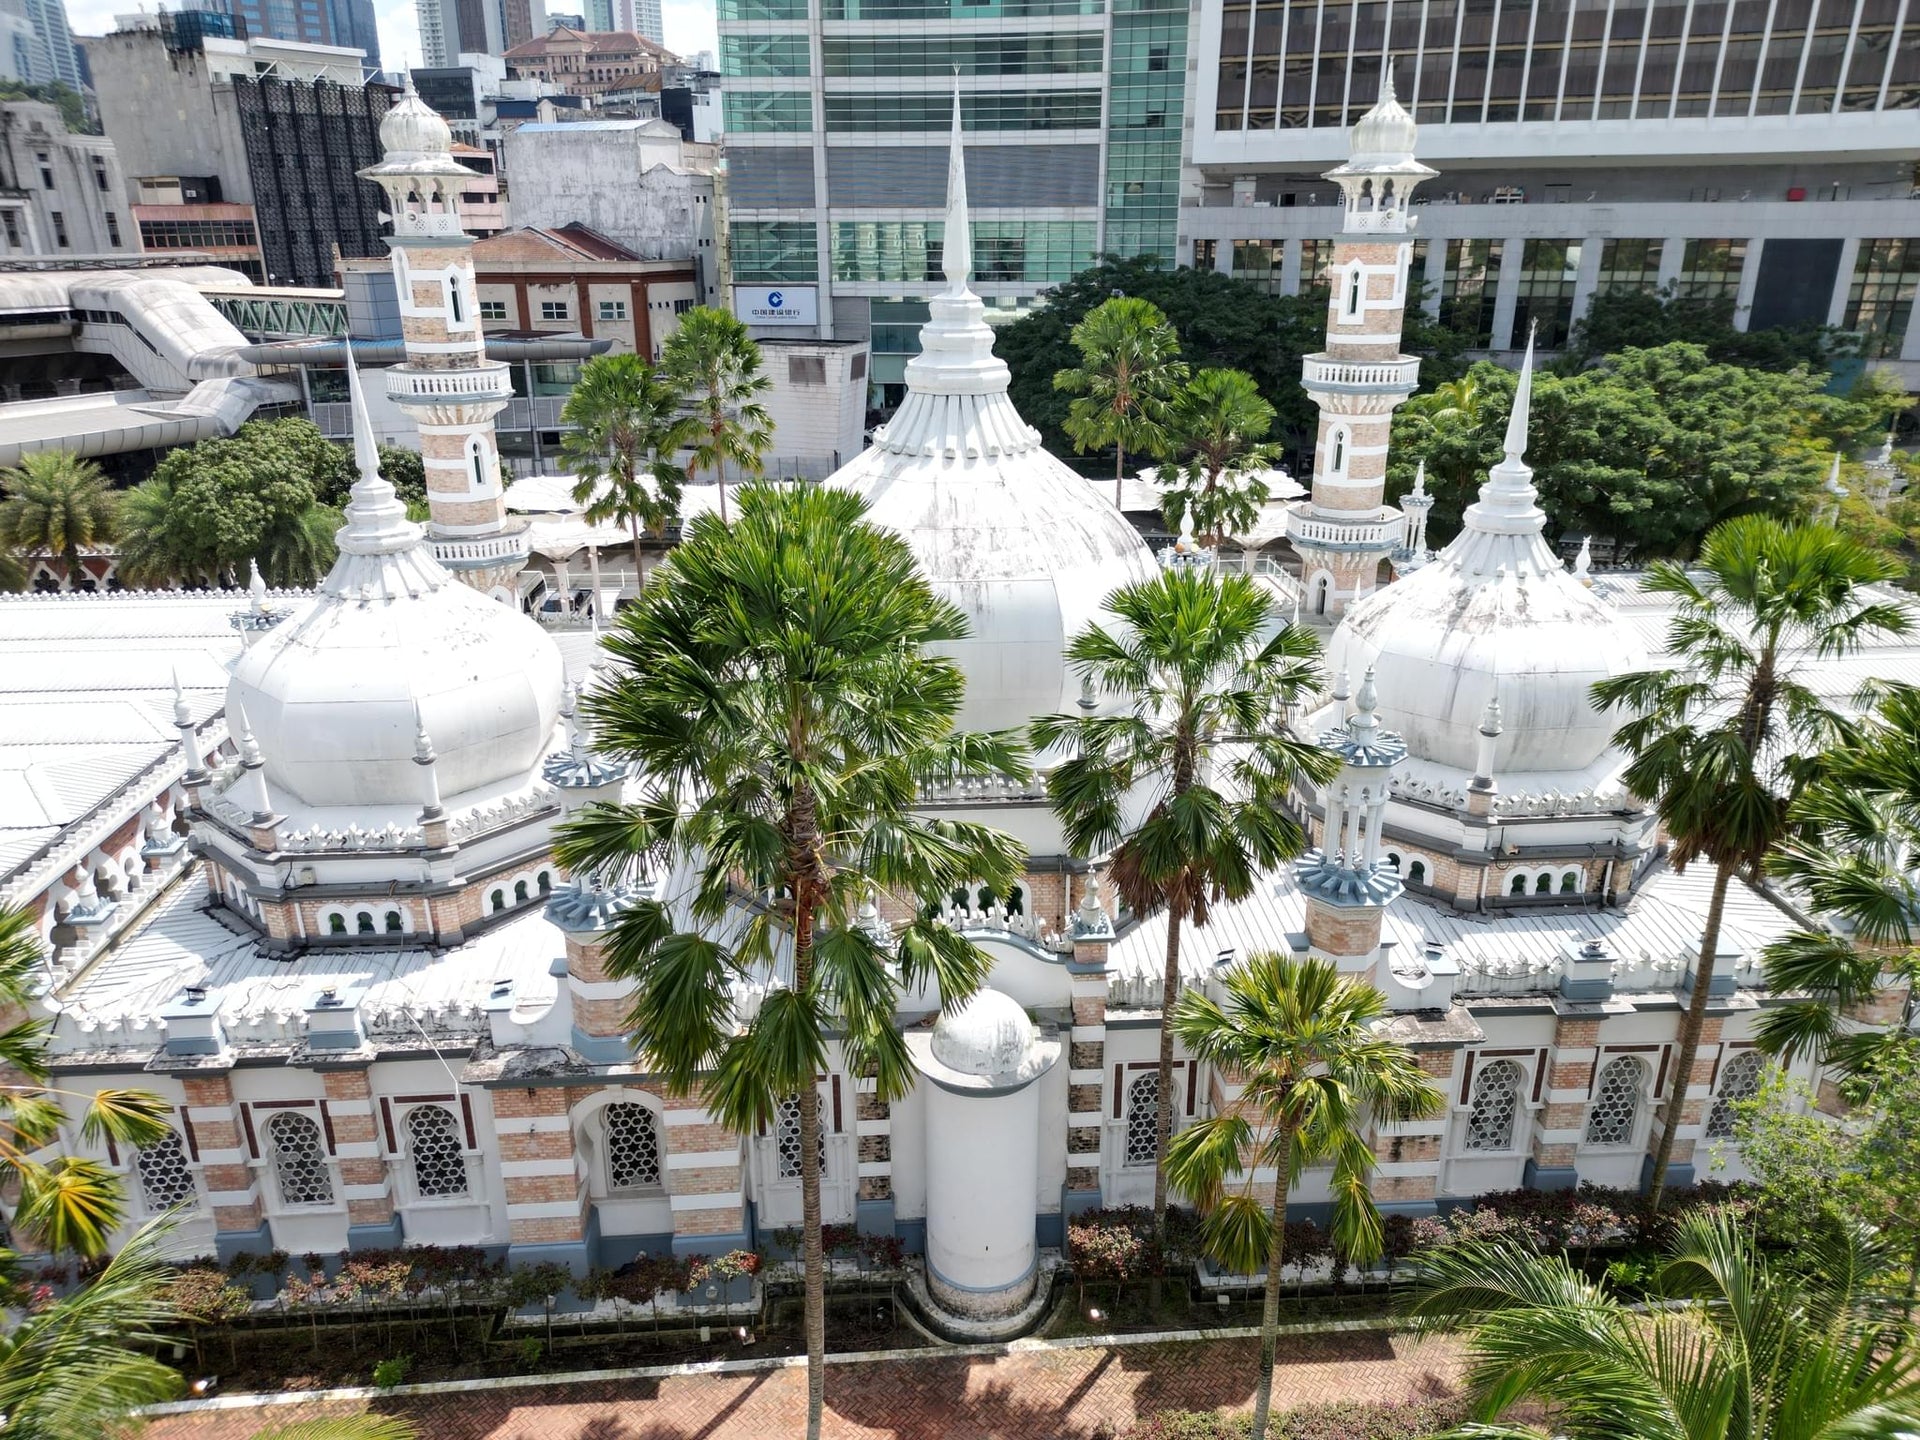 Malaysian Large Mosque